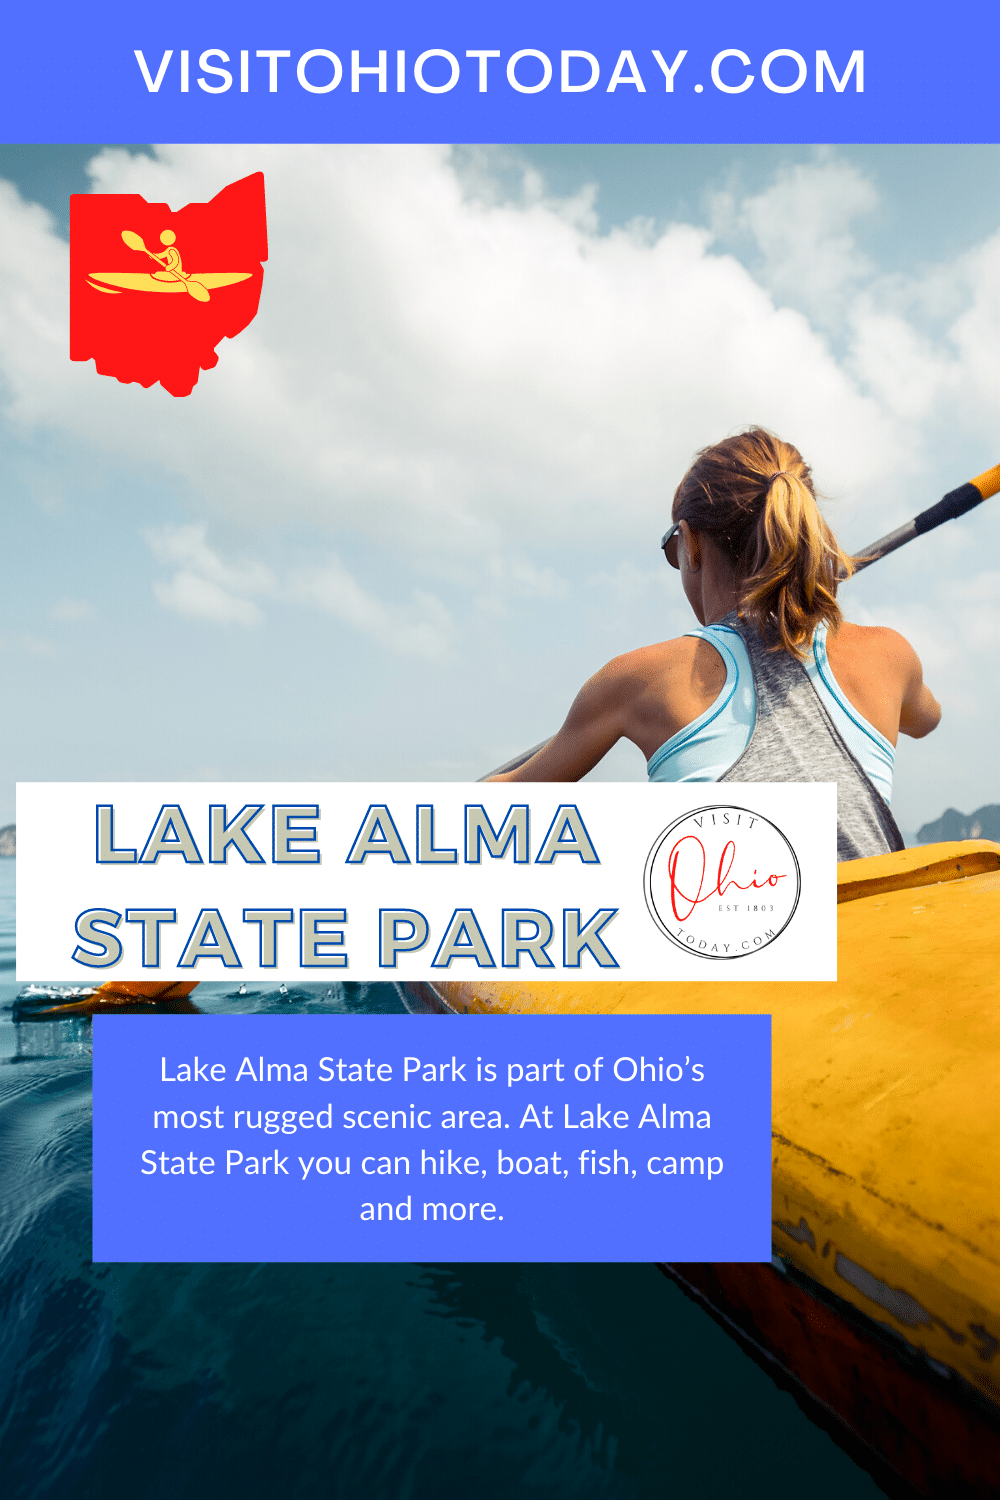 Lake Alma State Park is part of Ohio’s most rugged scenic area. At Lake Alma State Park you can hike, boat, fish, camp and more.